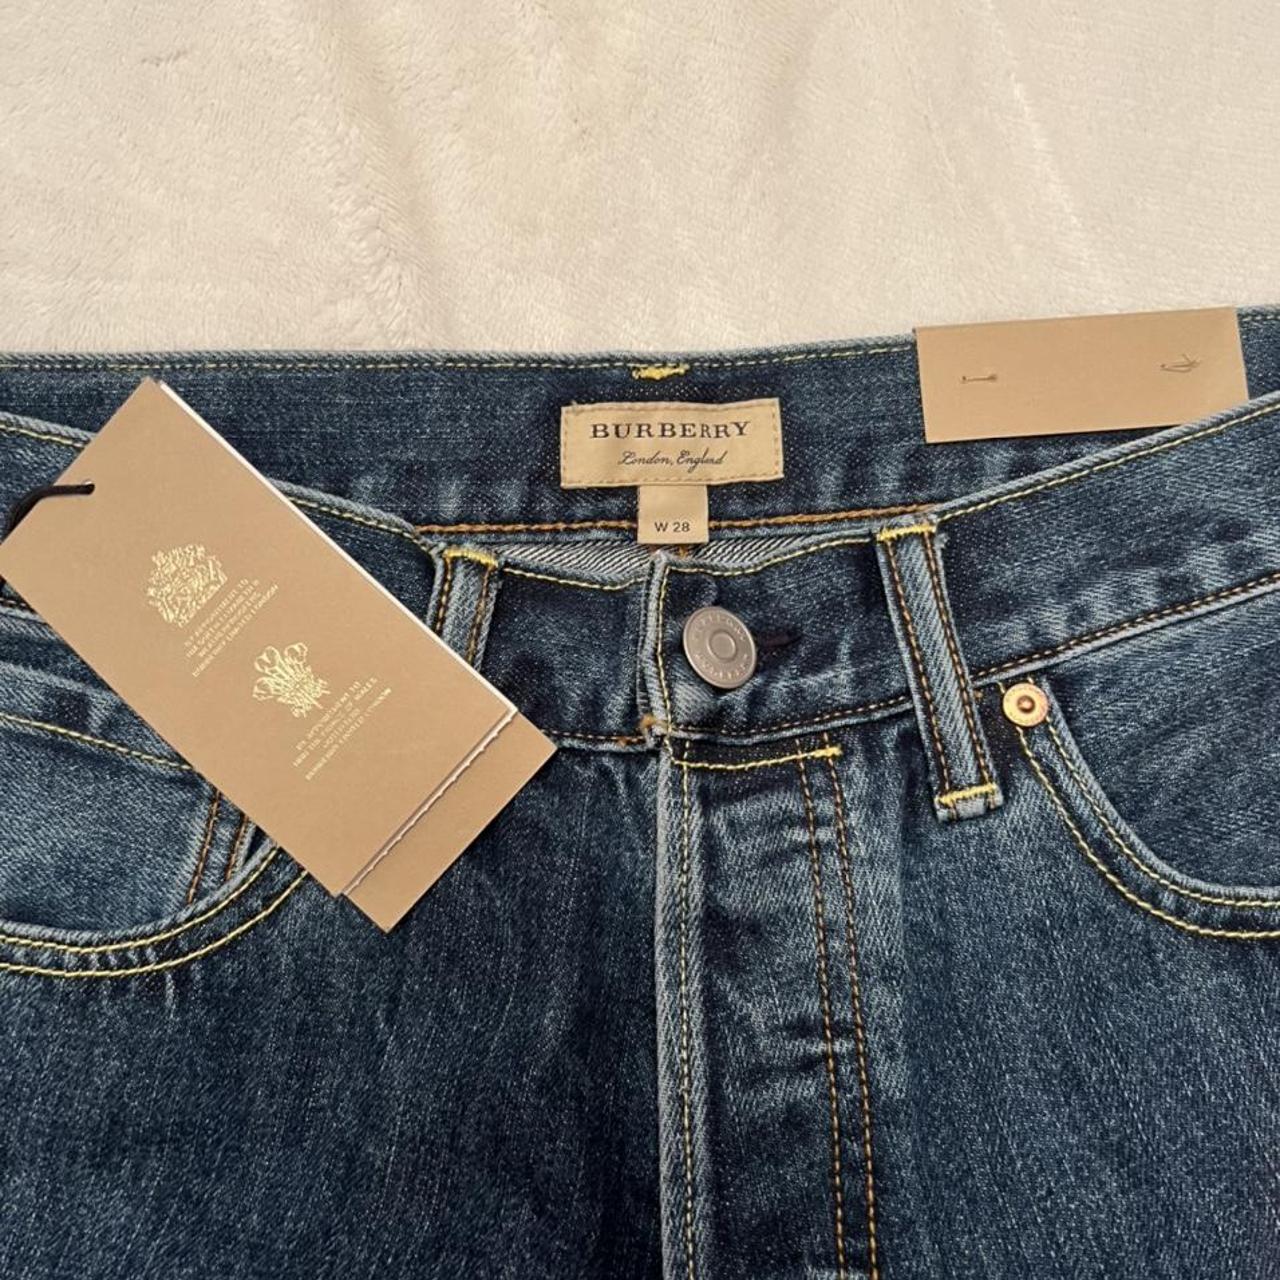 Burberry Women's Blue and Brown Jeans | Depop